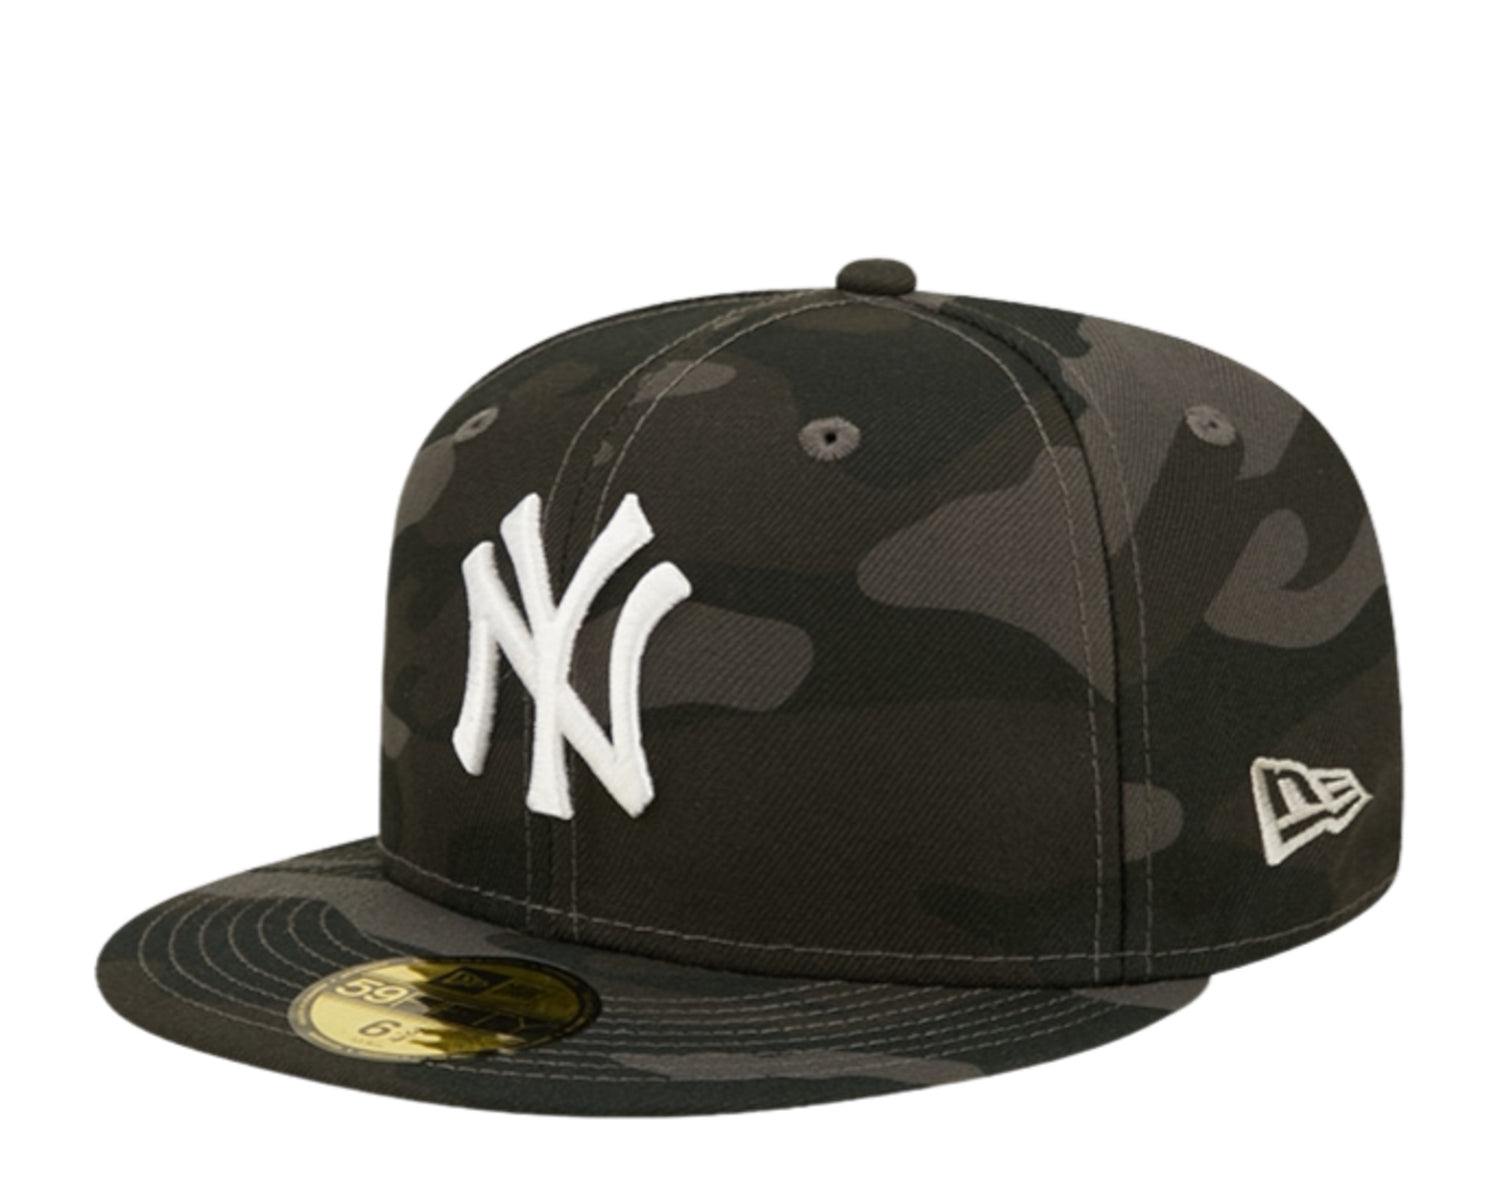 New Era - 59Fifty - Fitted Hats - Duck Camo